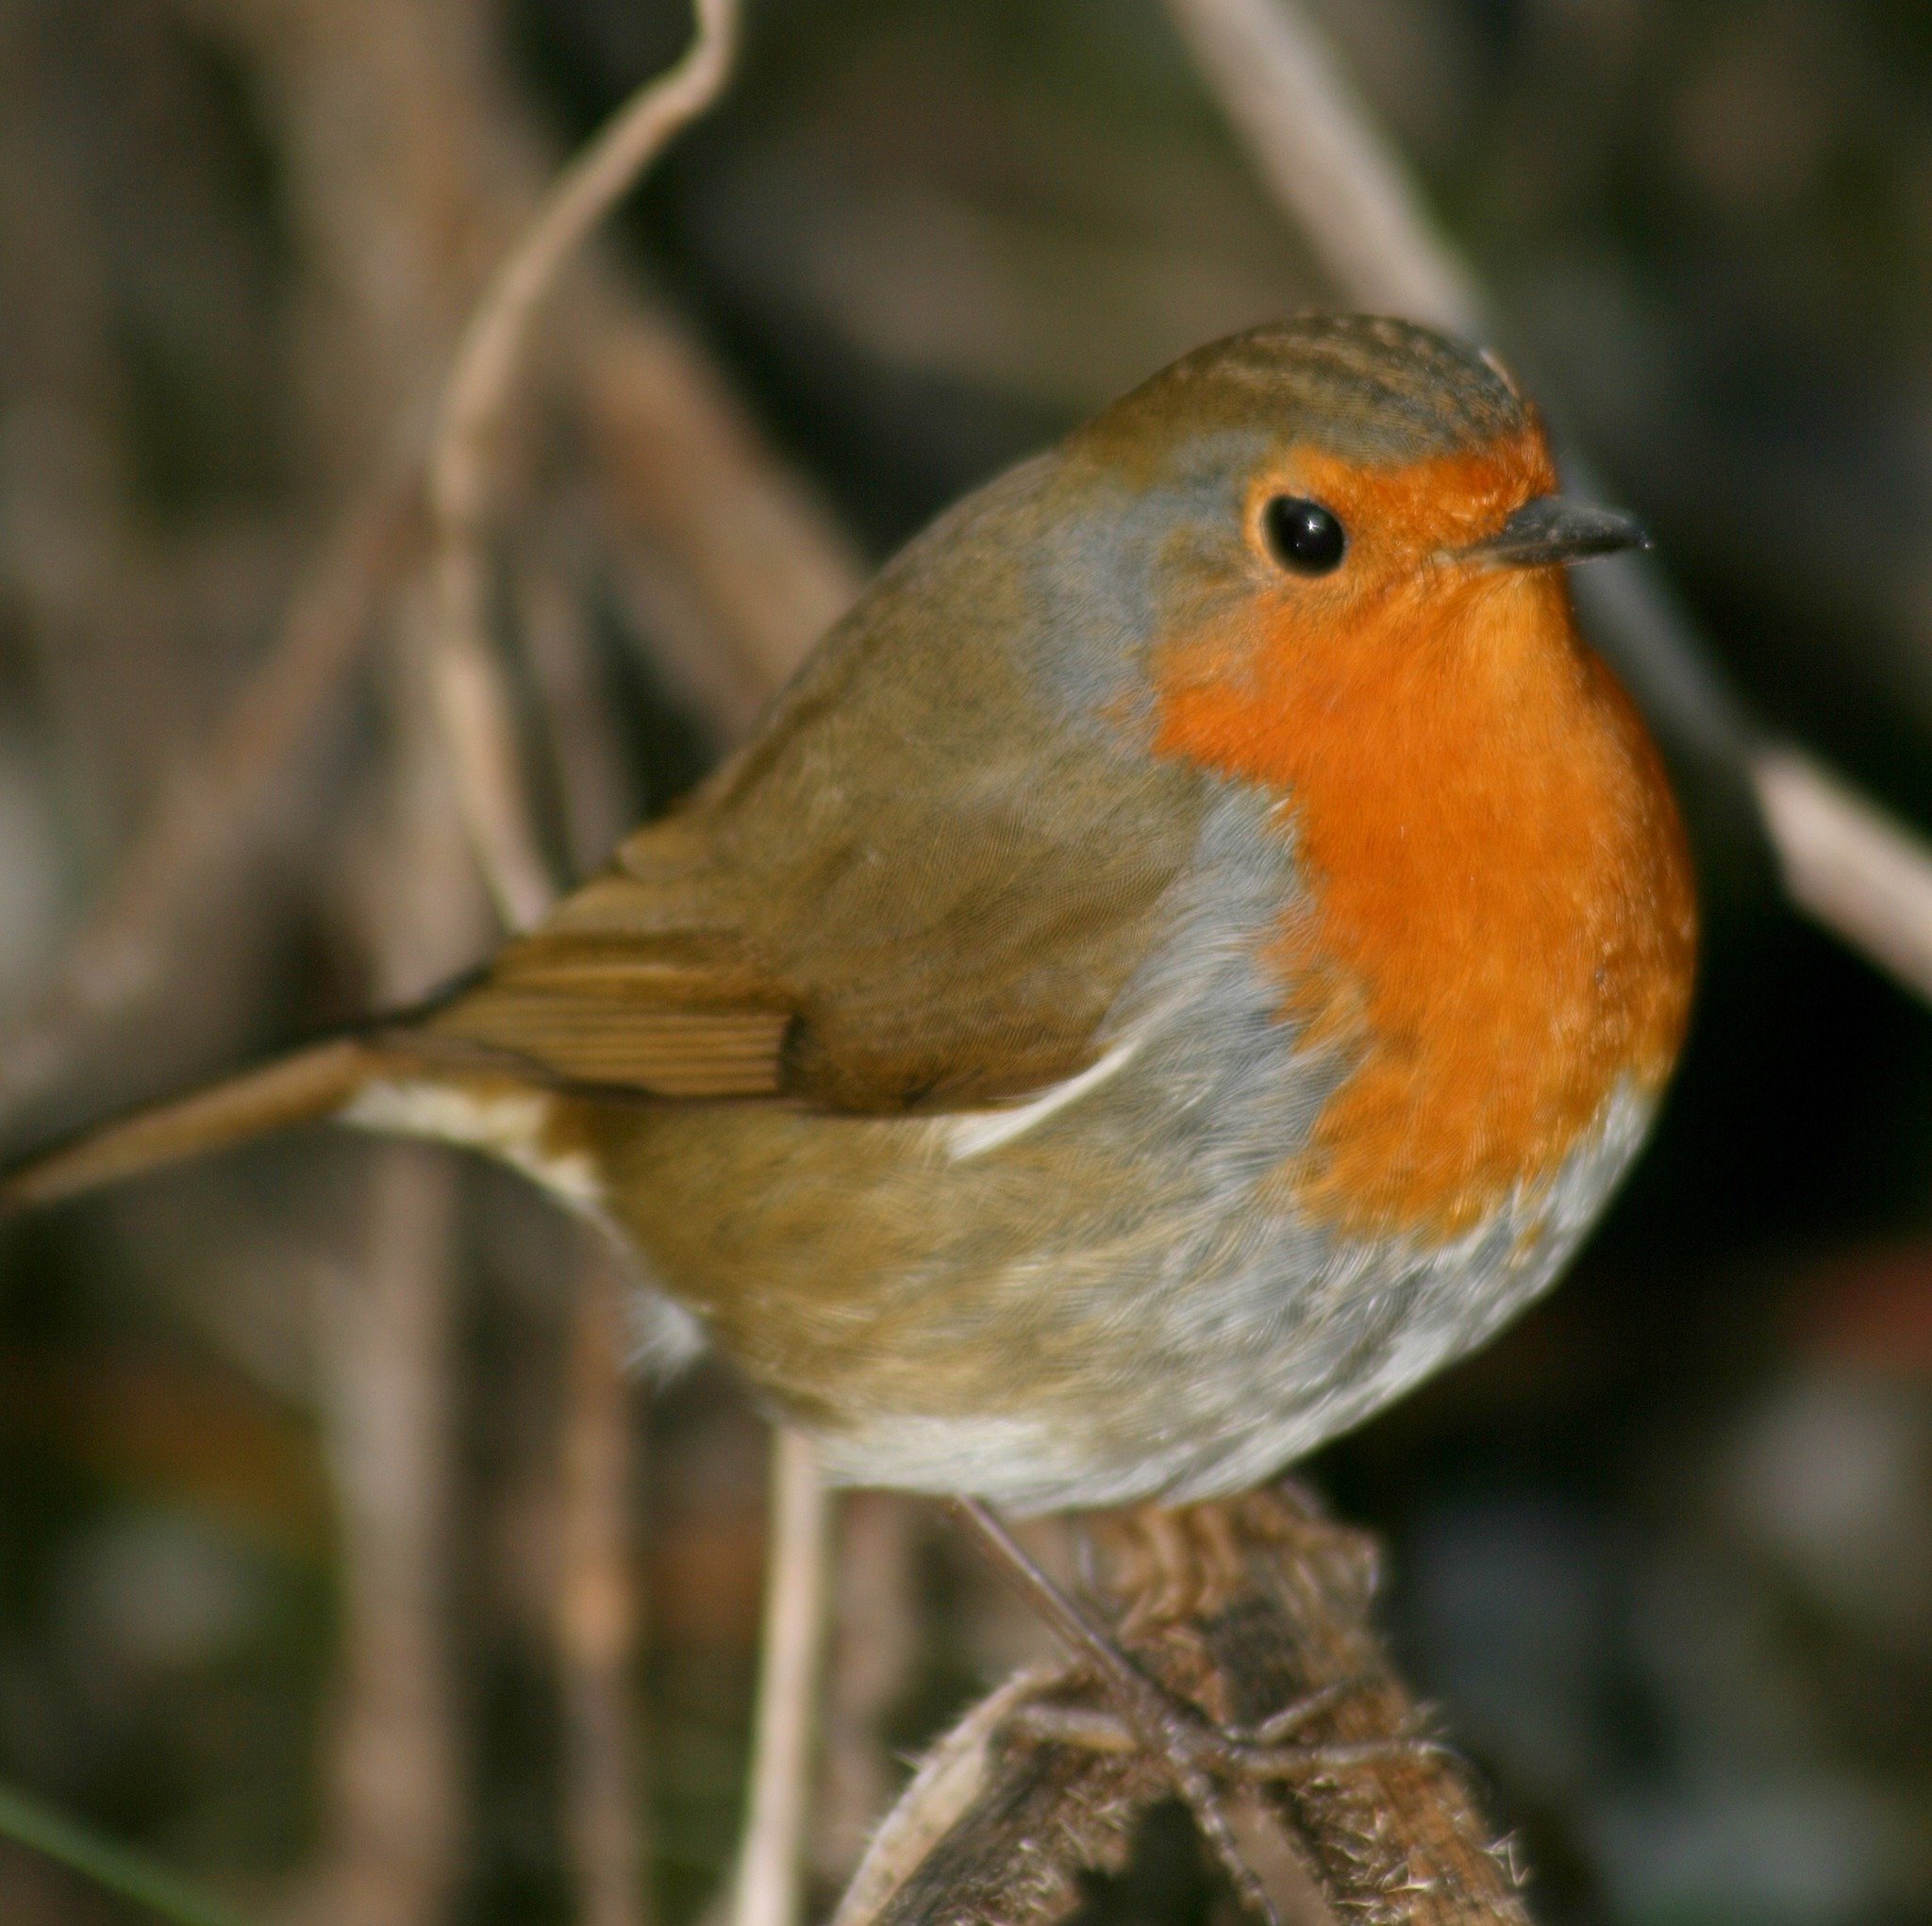 On this day in 2015 not only did the British nation cast their votes in a general election but also in the National Bird Vote. The winner was the Robin with 34% of the vote from a shortlist of 10 national birds. This much-loved little bird is synonym